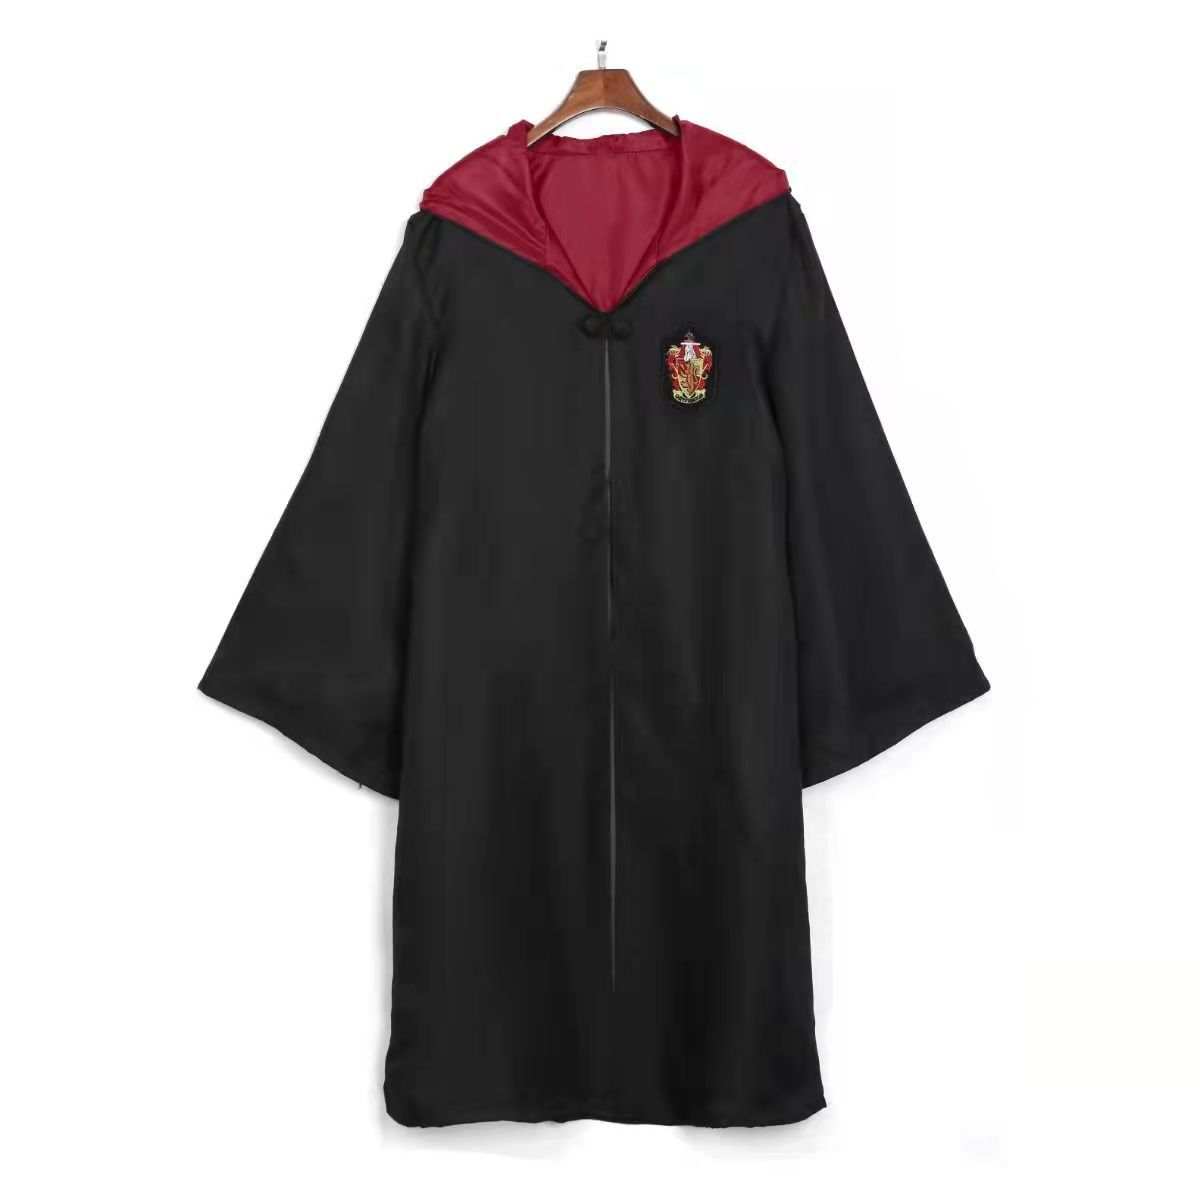 Deluxe Harry Potter Hermione Costume for Girls, Kid's Gryffindor Robe for  Fantasy & Magic or Wizard Cosplay